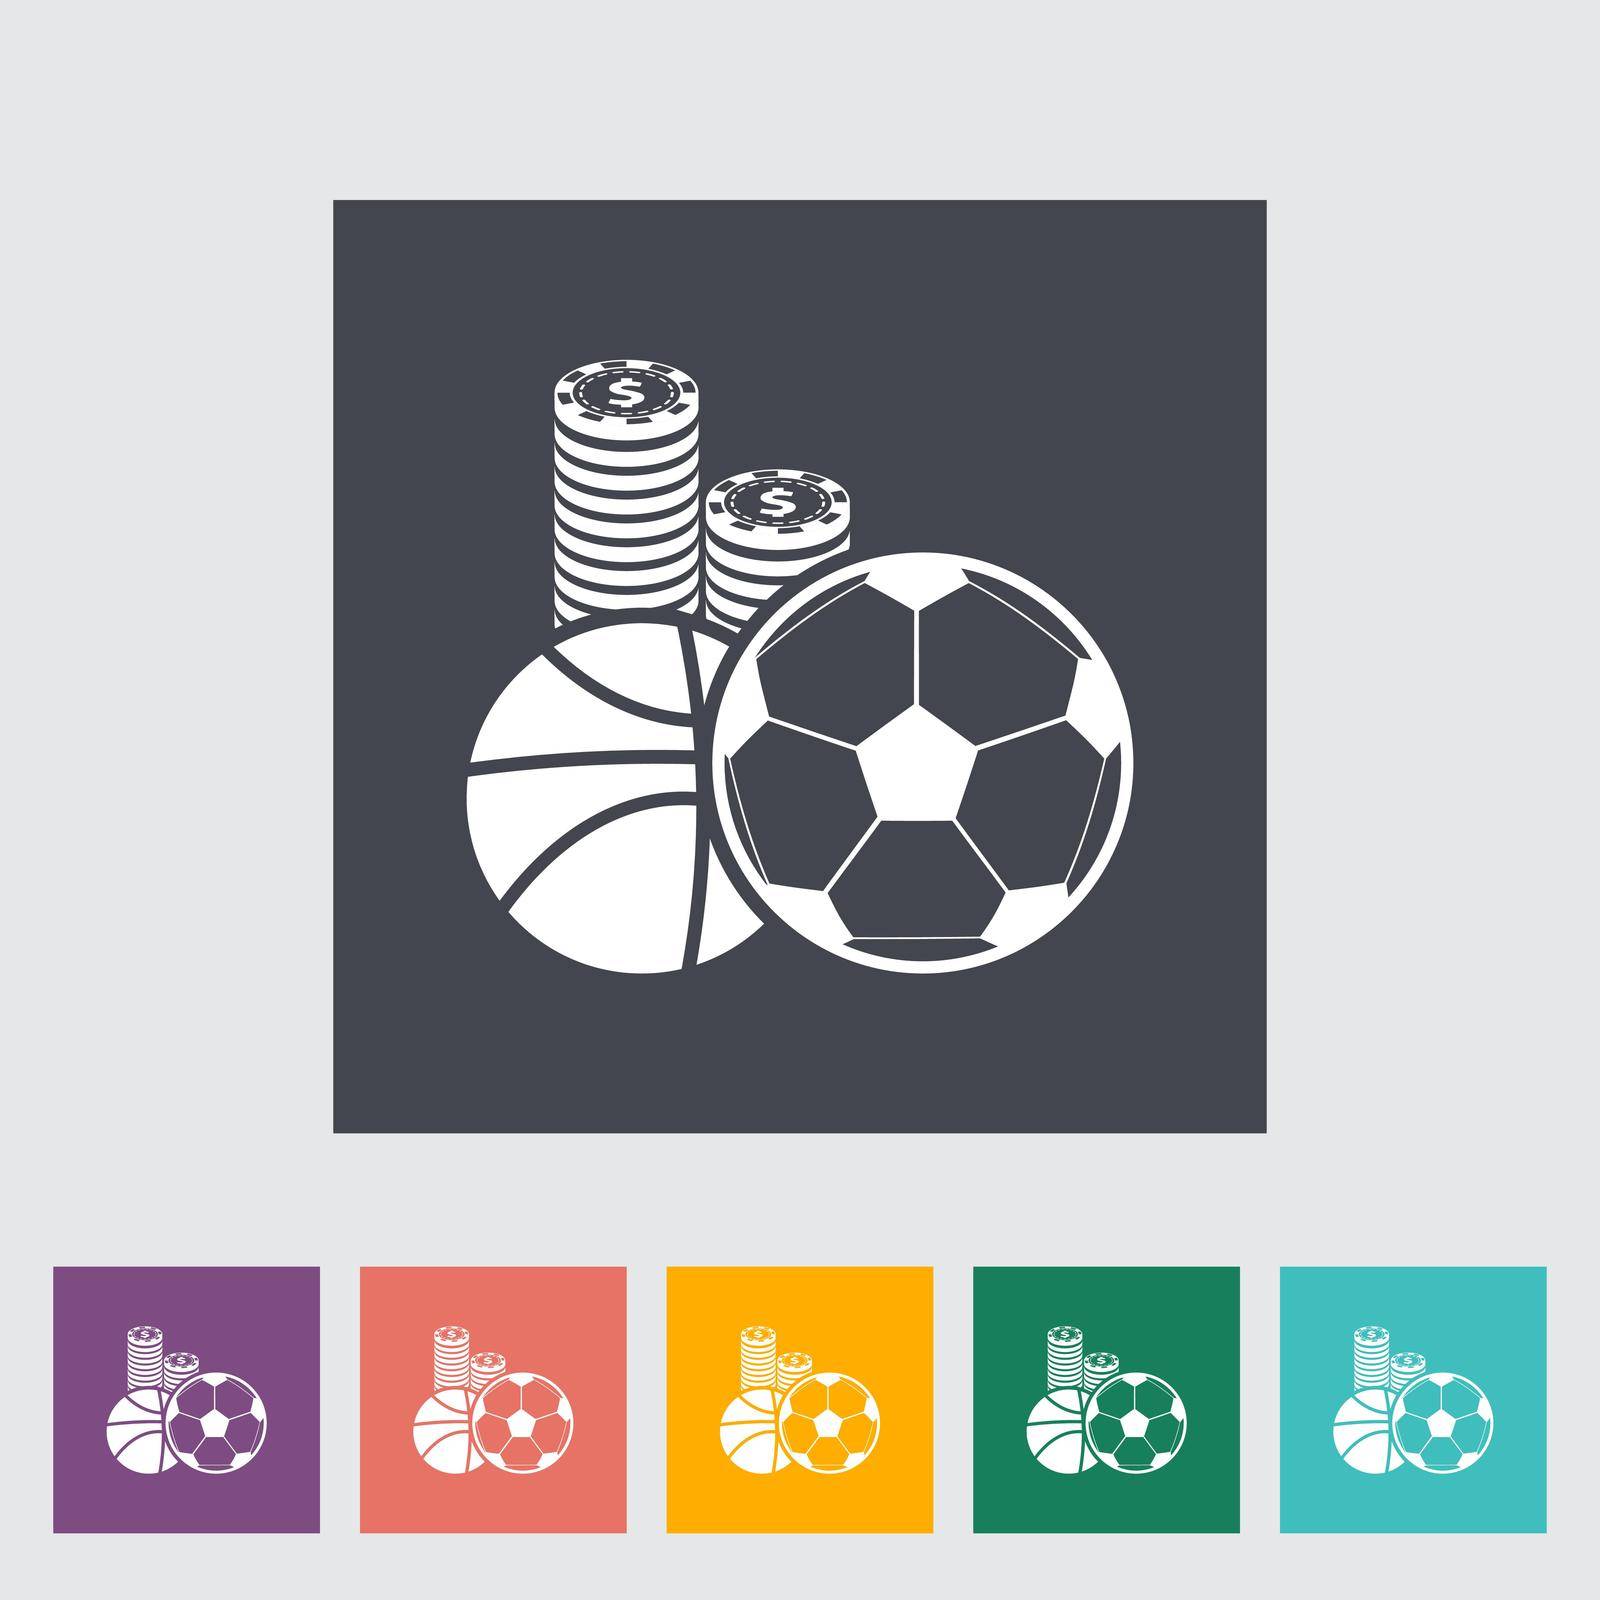 Sport games. Single flat icon on the button. Vector illustration.